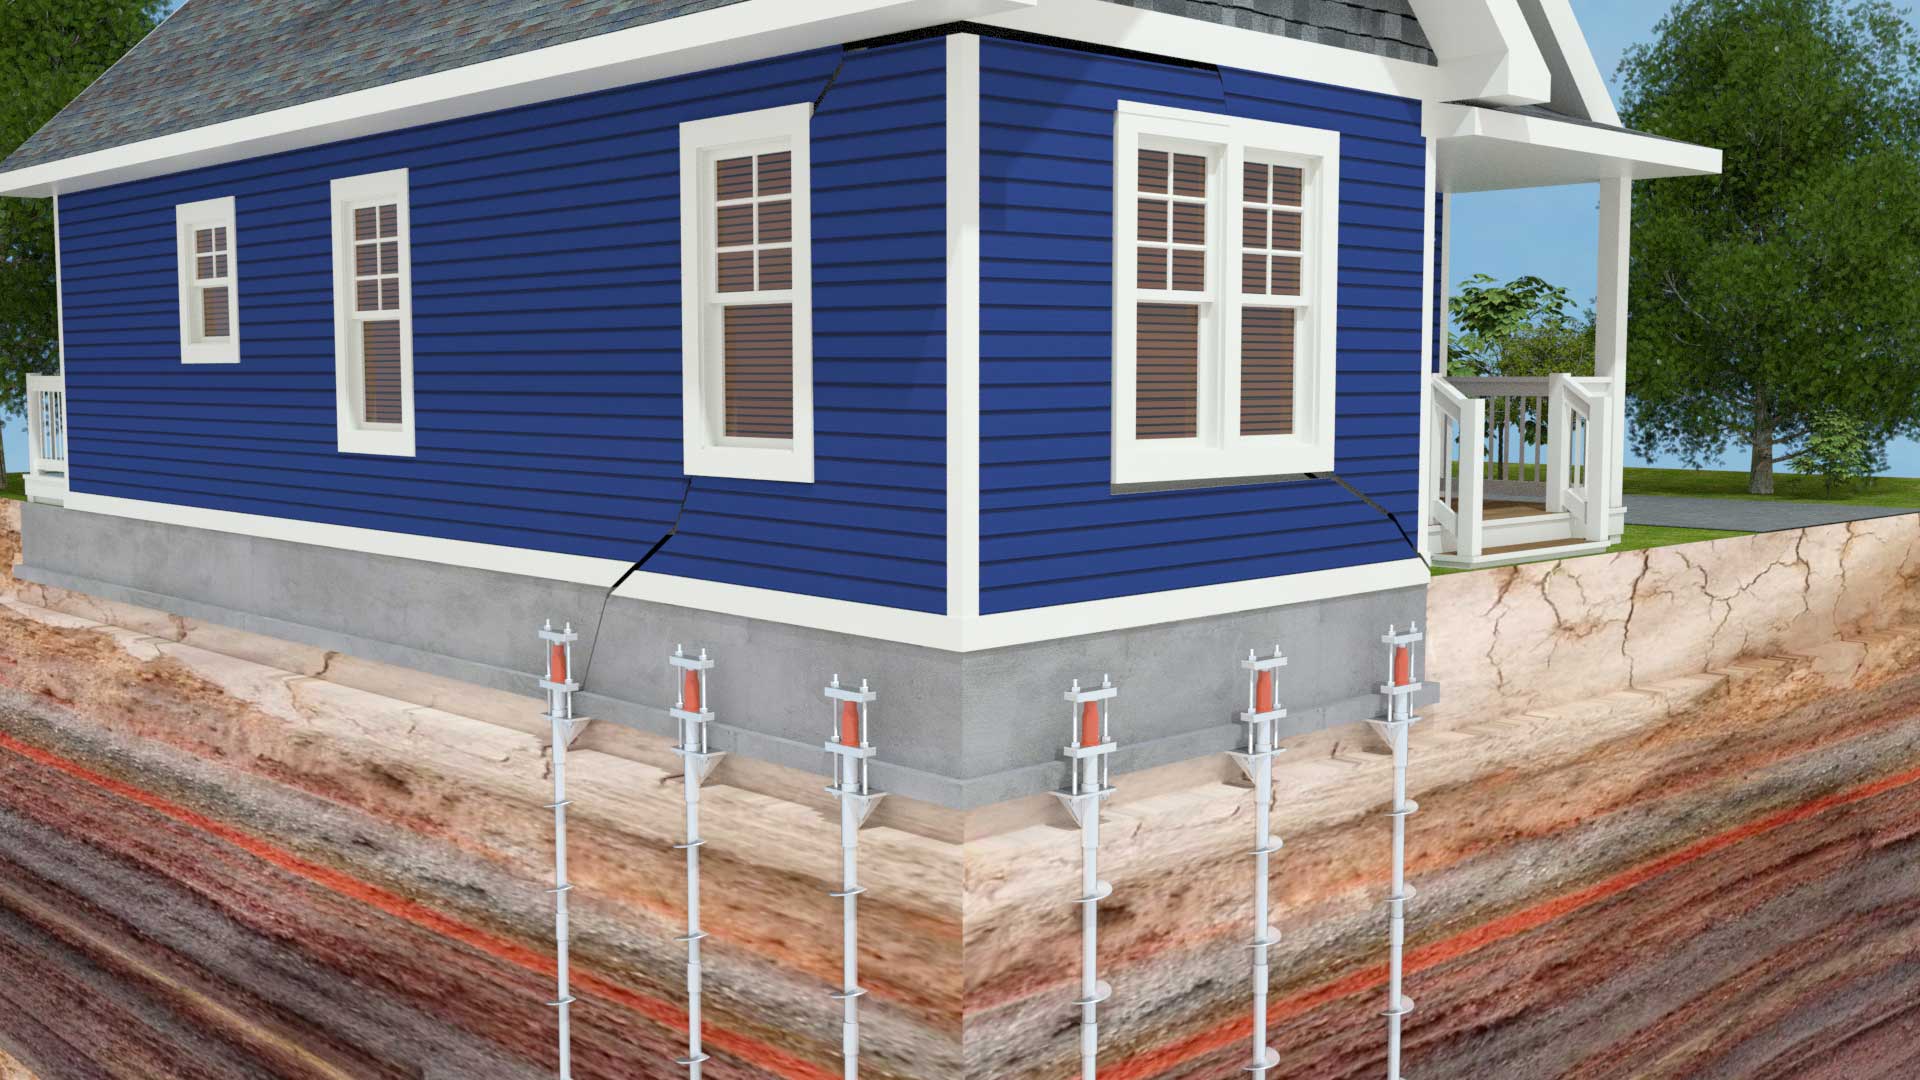 Using expert piering solutions, R&R Foundation Specialists lift your foundation back into place | Residential and commercial foundation repair services